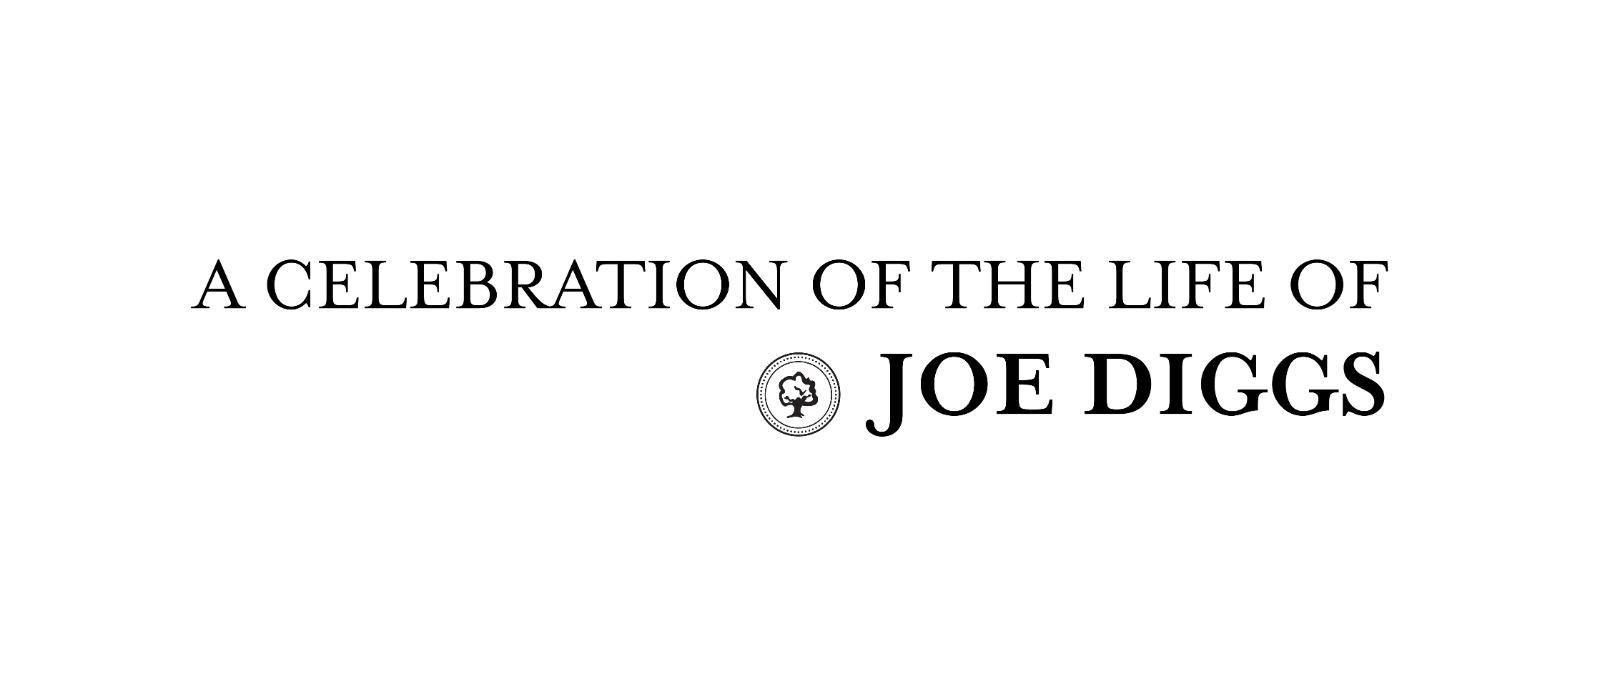 A Celebration of the Life of Joe Diggs